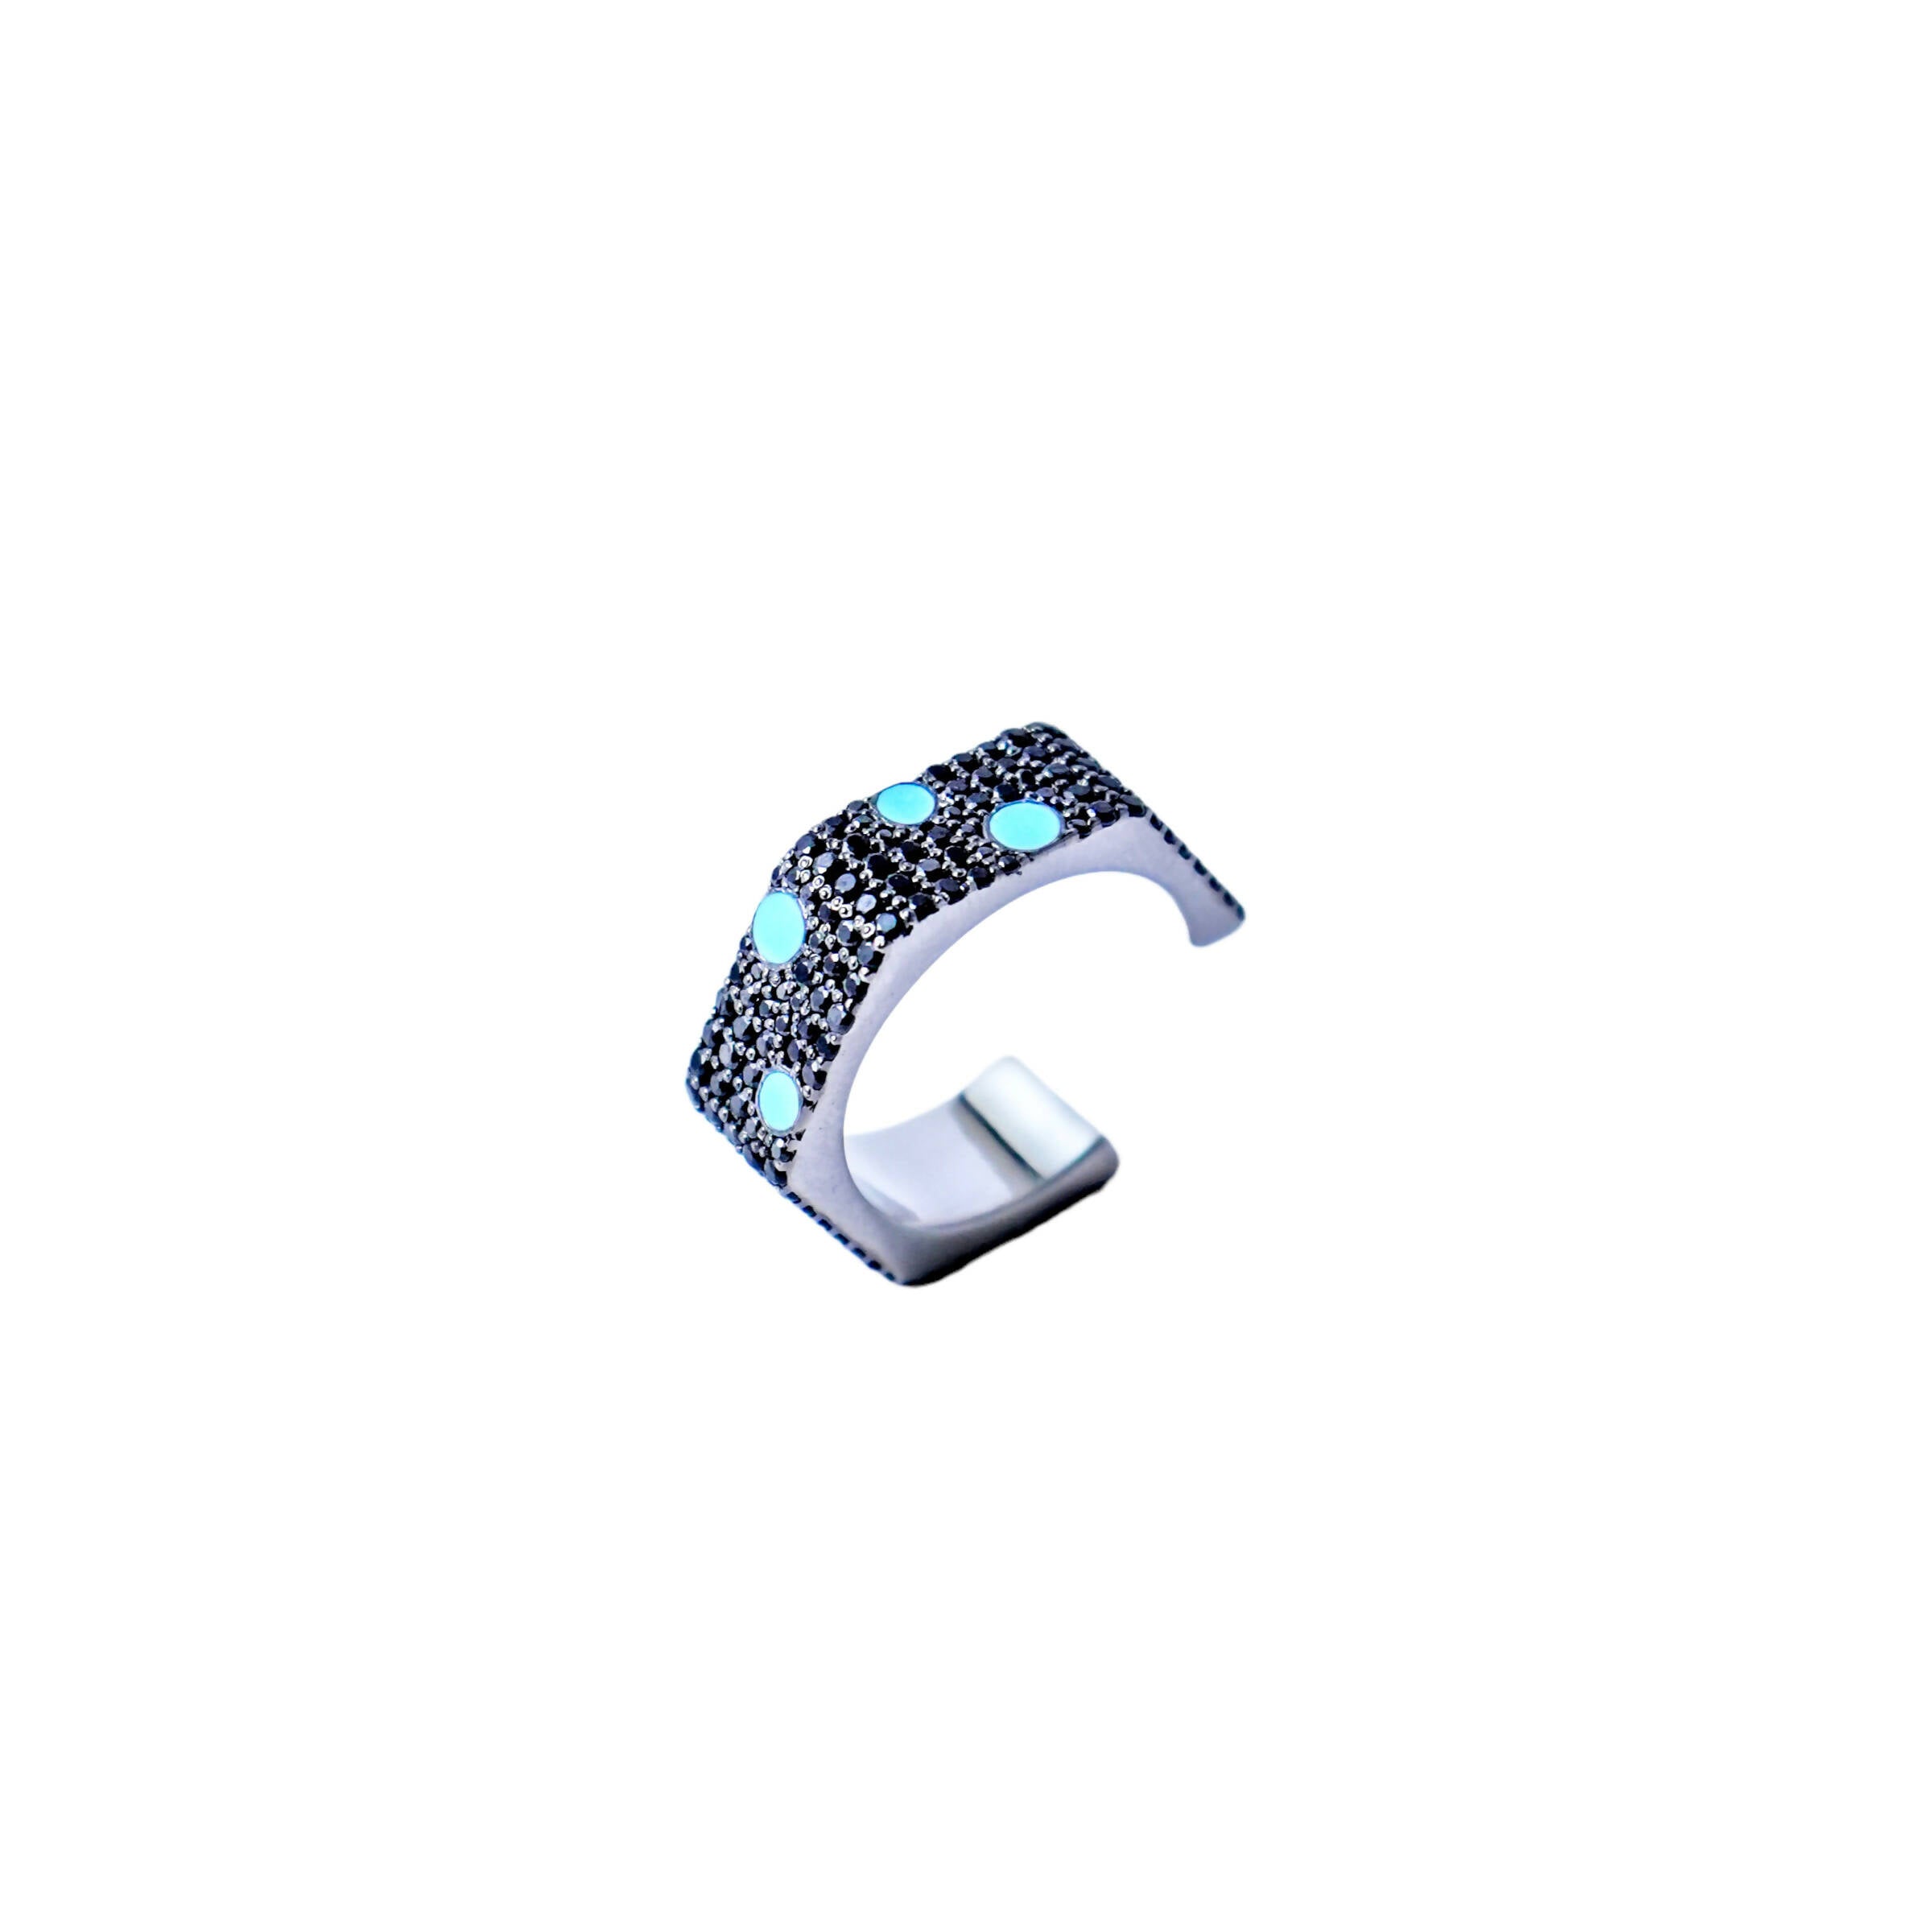 DOTTED HEX NUT RING